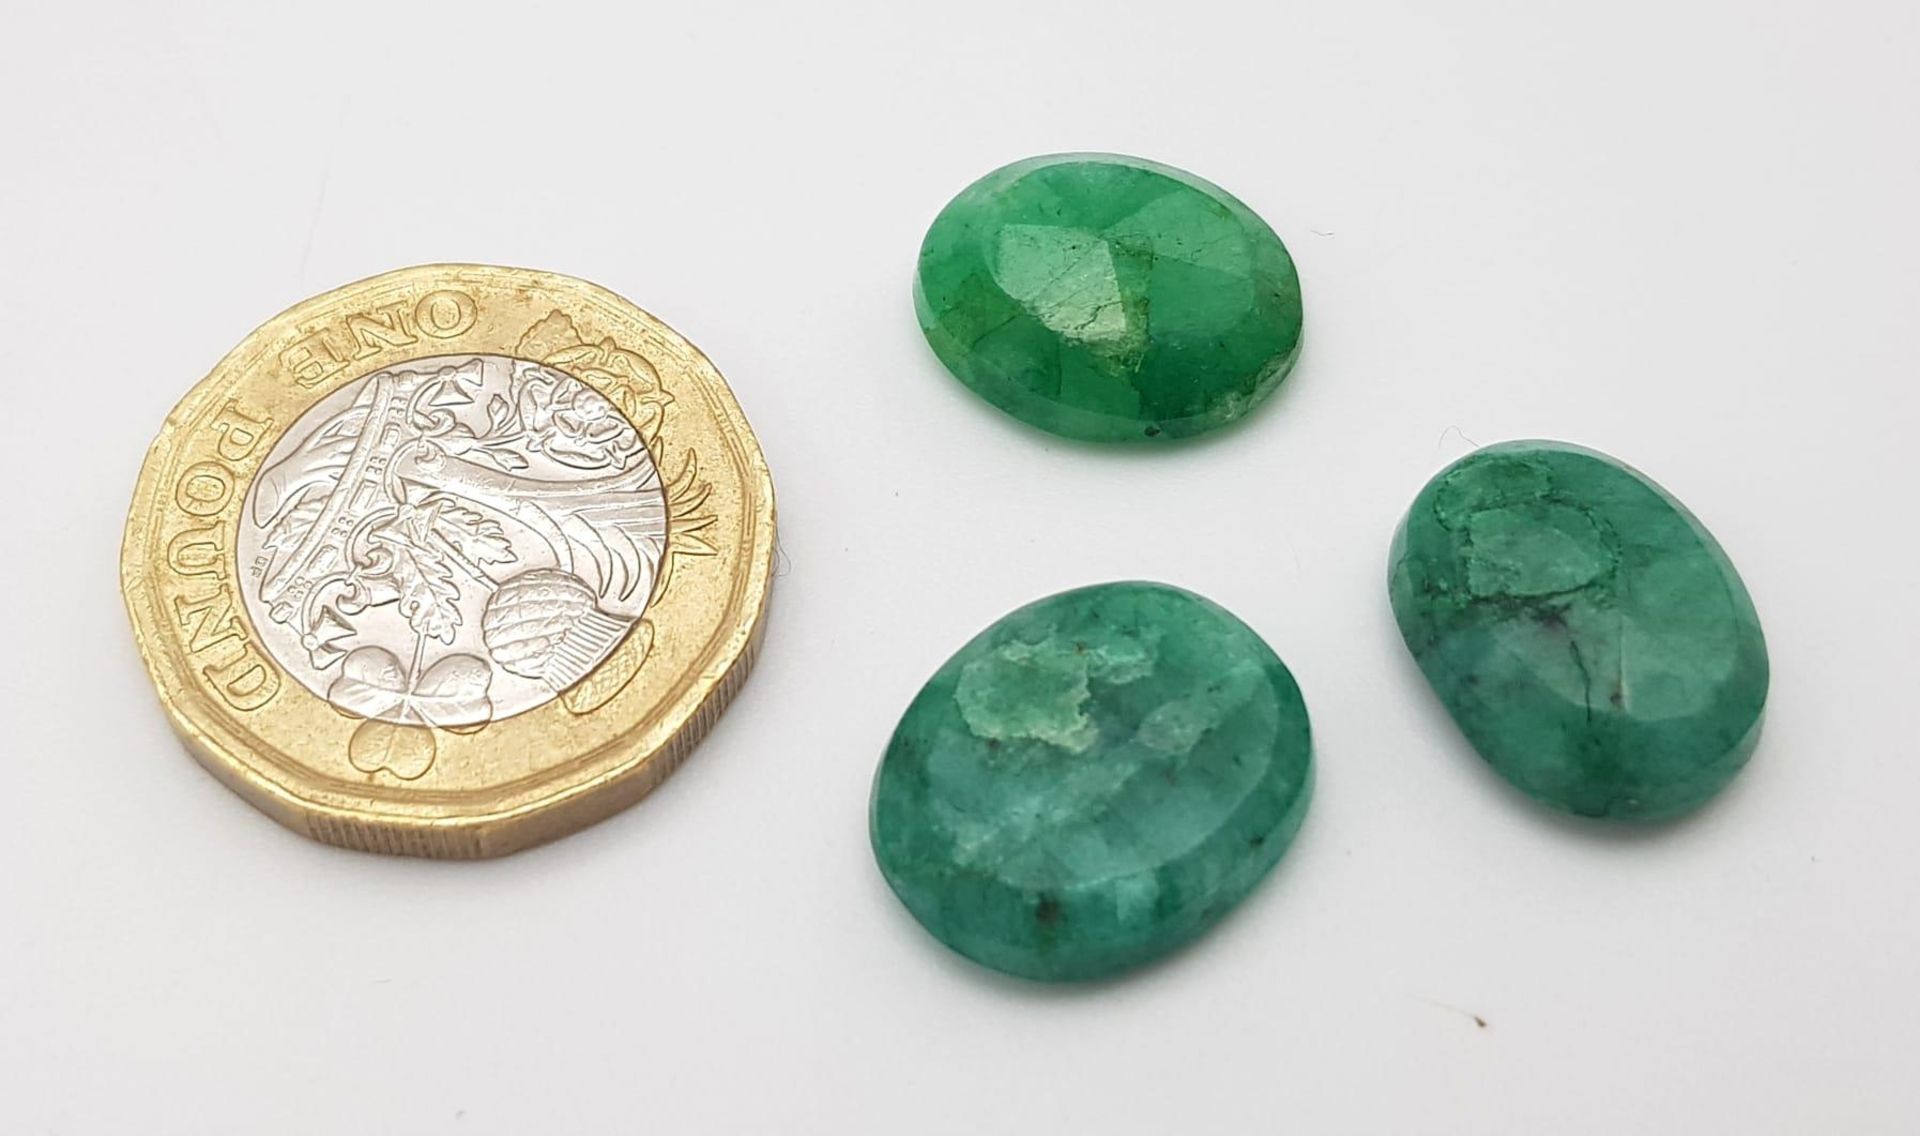 23ctw of Natural Emerald. - Image 3 of 3